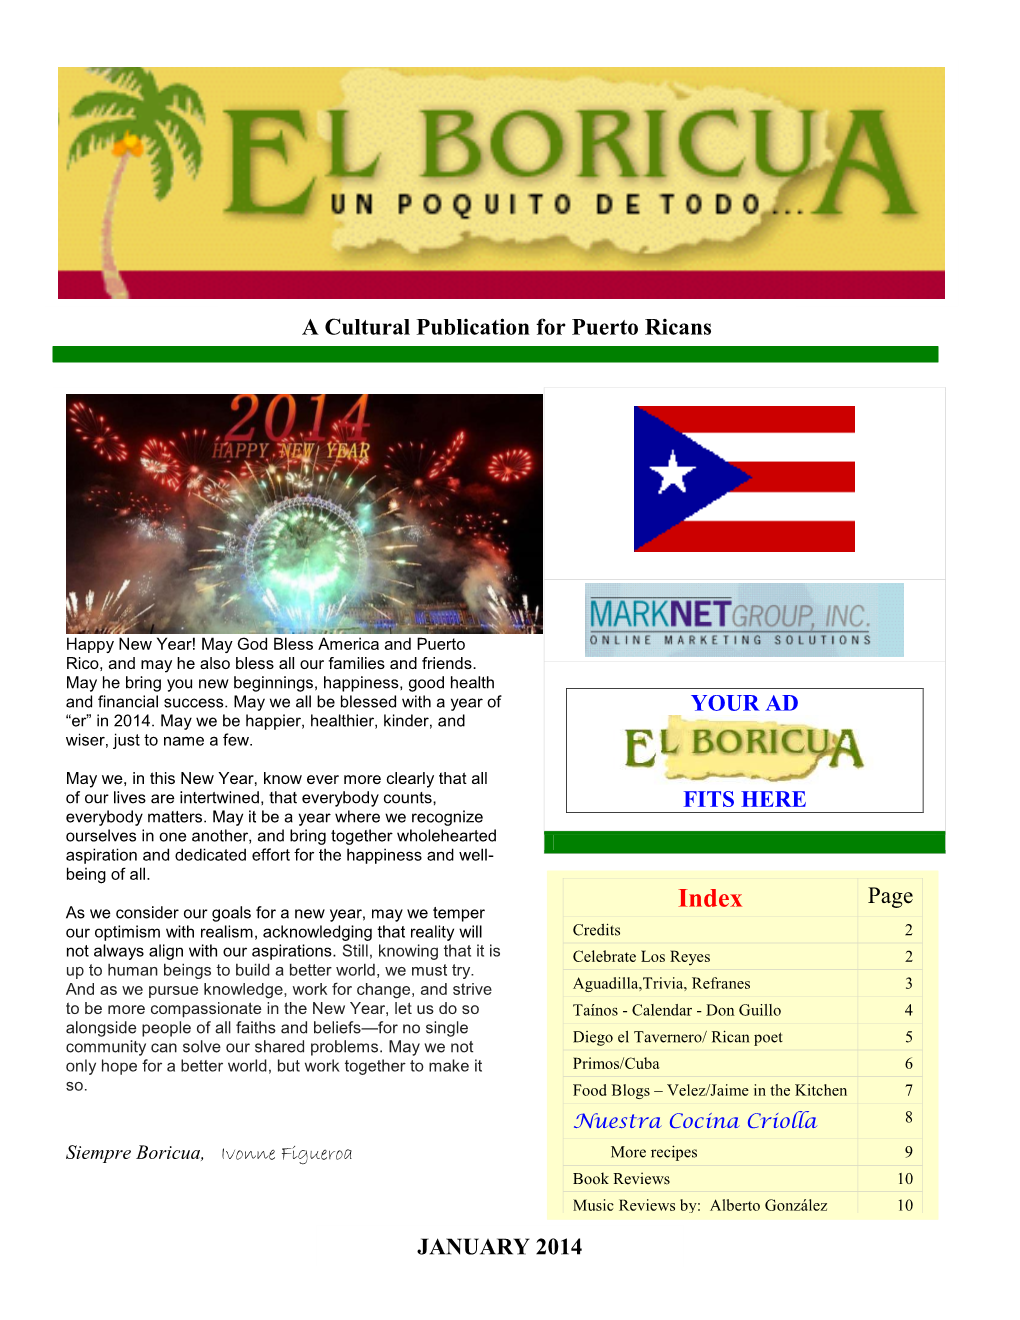 YOUR AD FITS HERE a Cultural Publication for Puerto Ricans Page JANUARY 2014